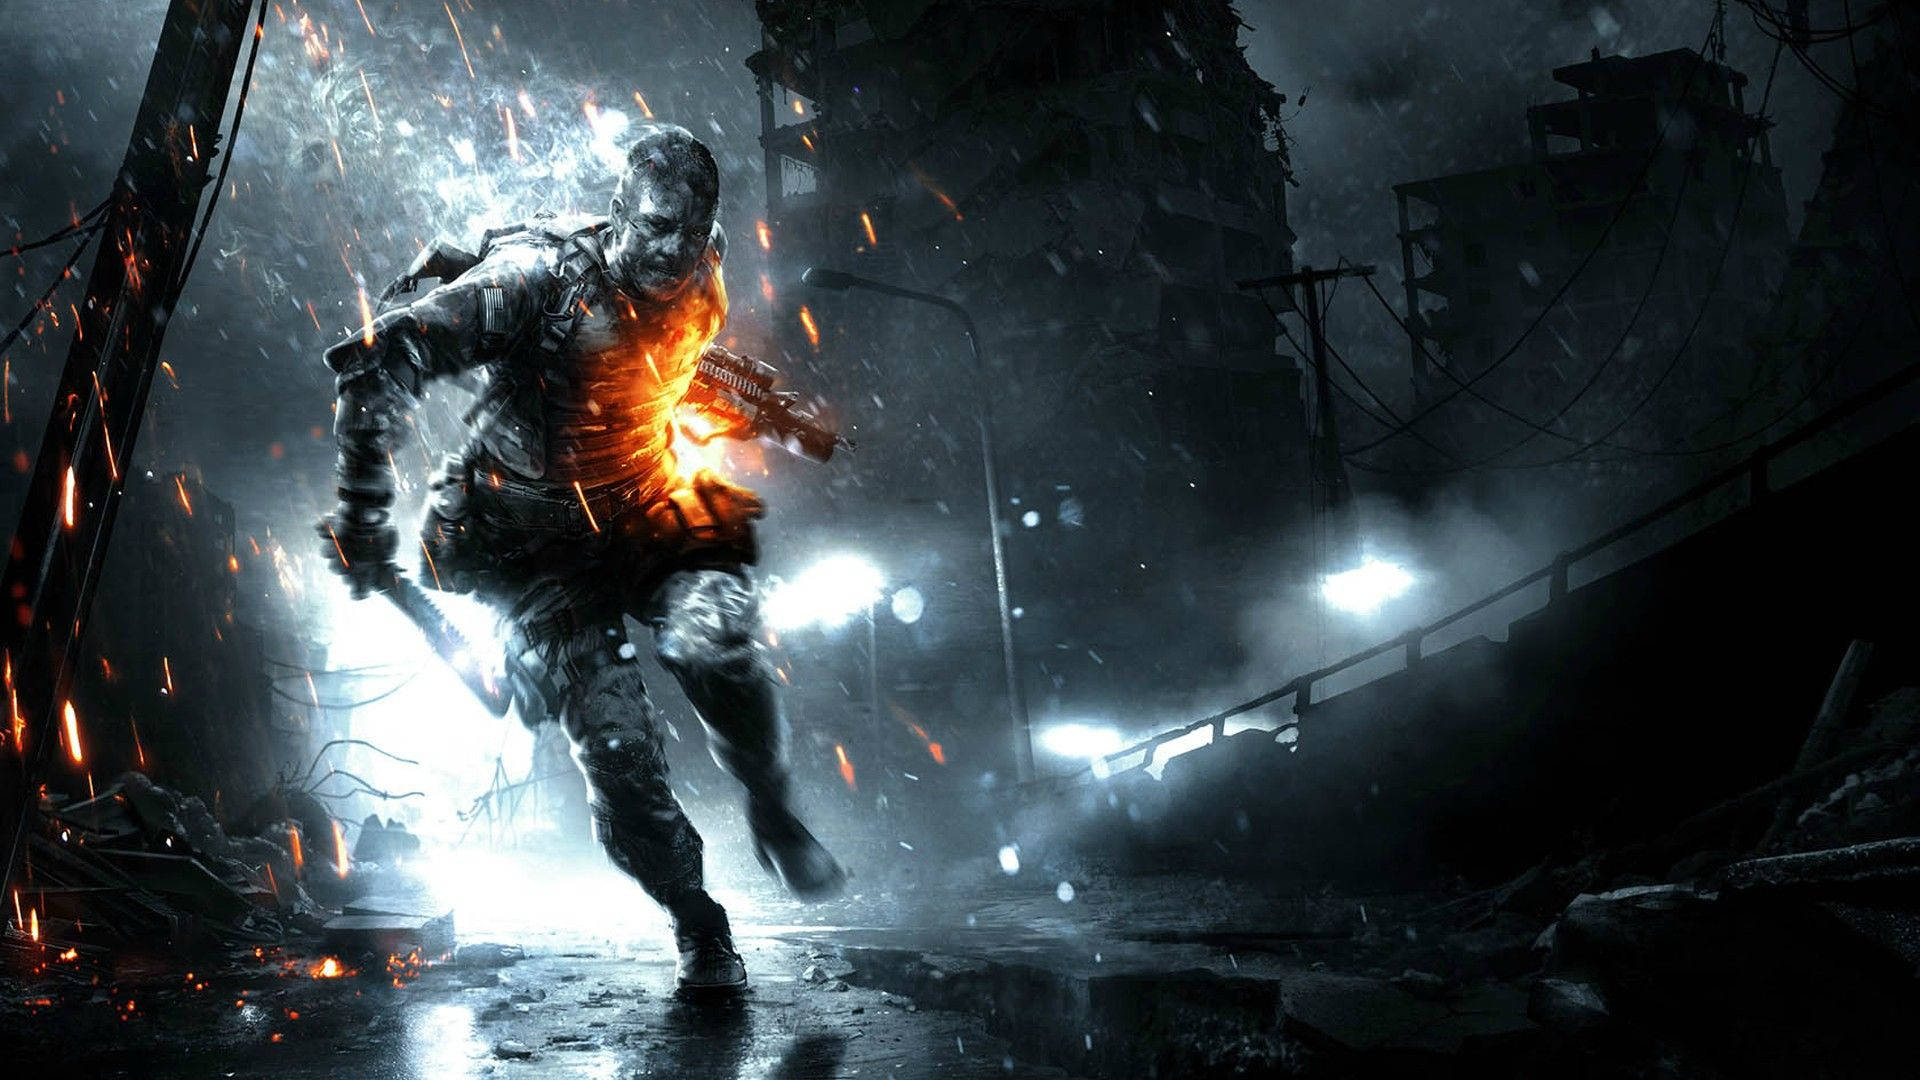 Hd Cool Battlefield Gaming Cover Wallpaper